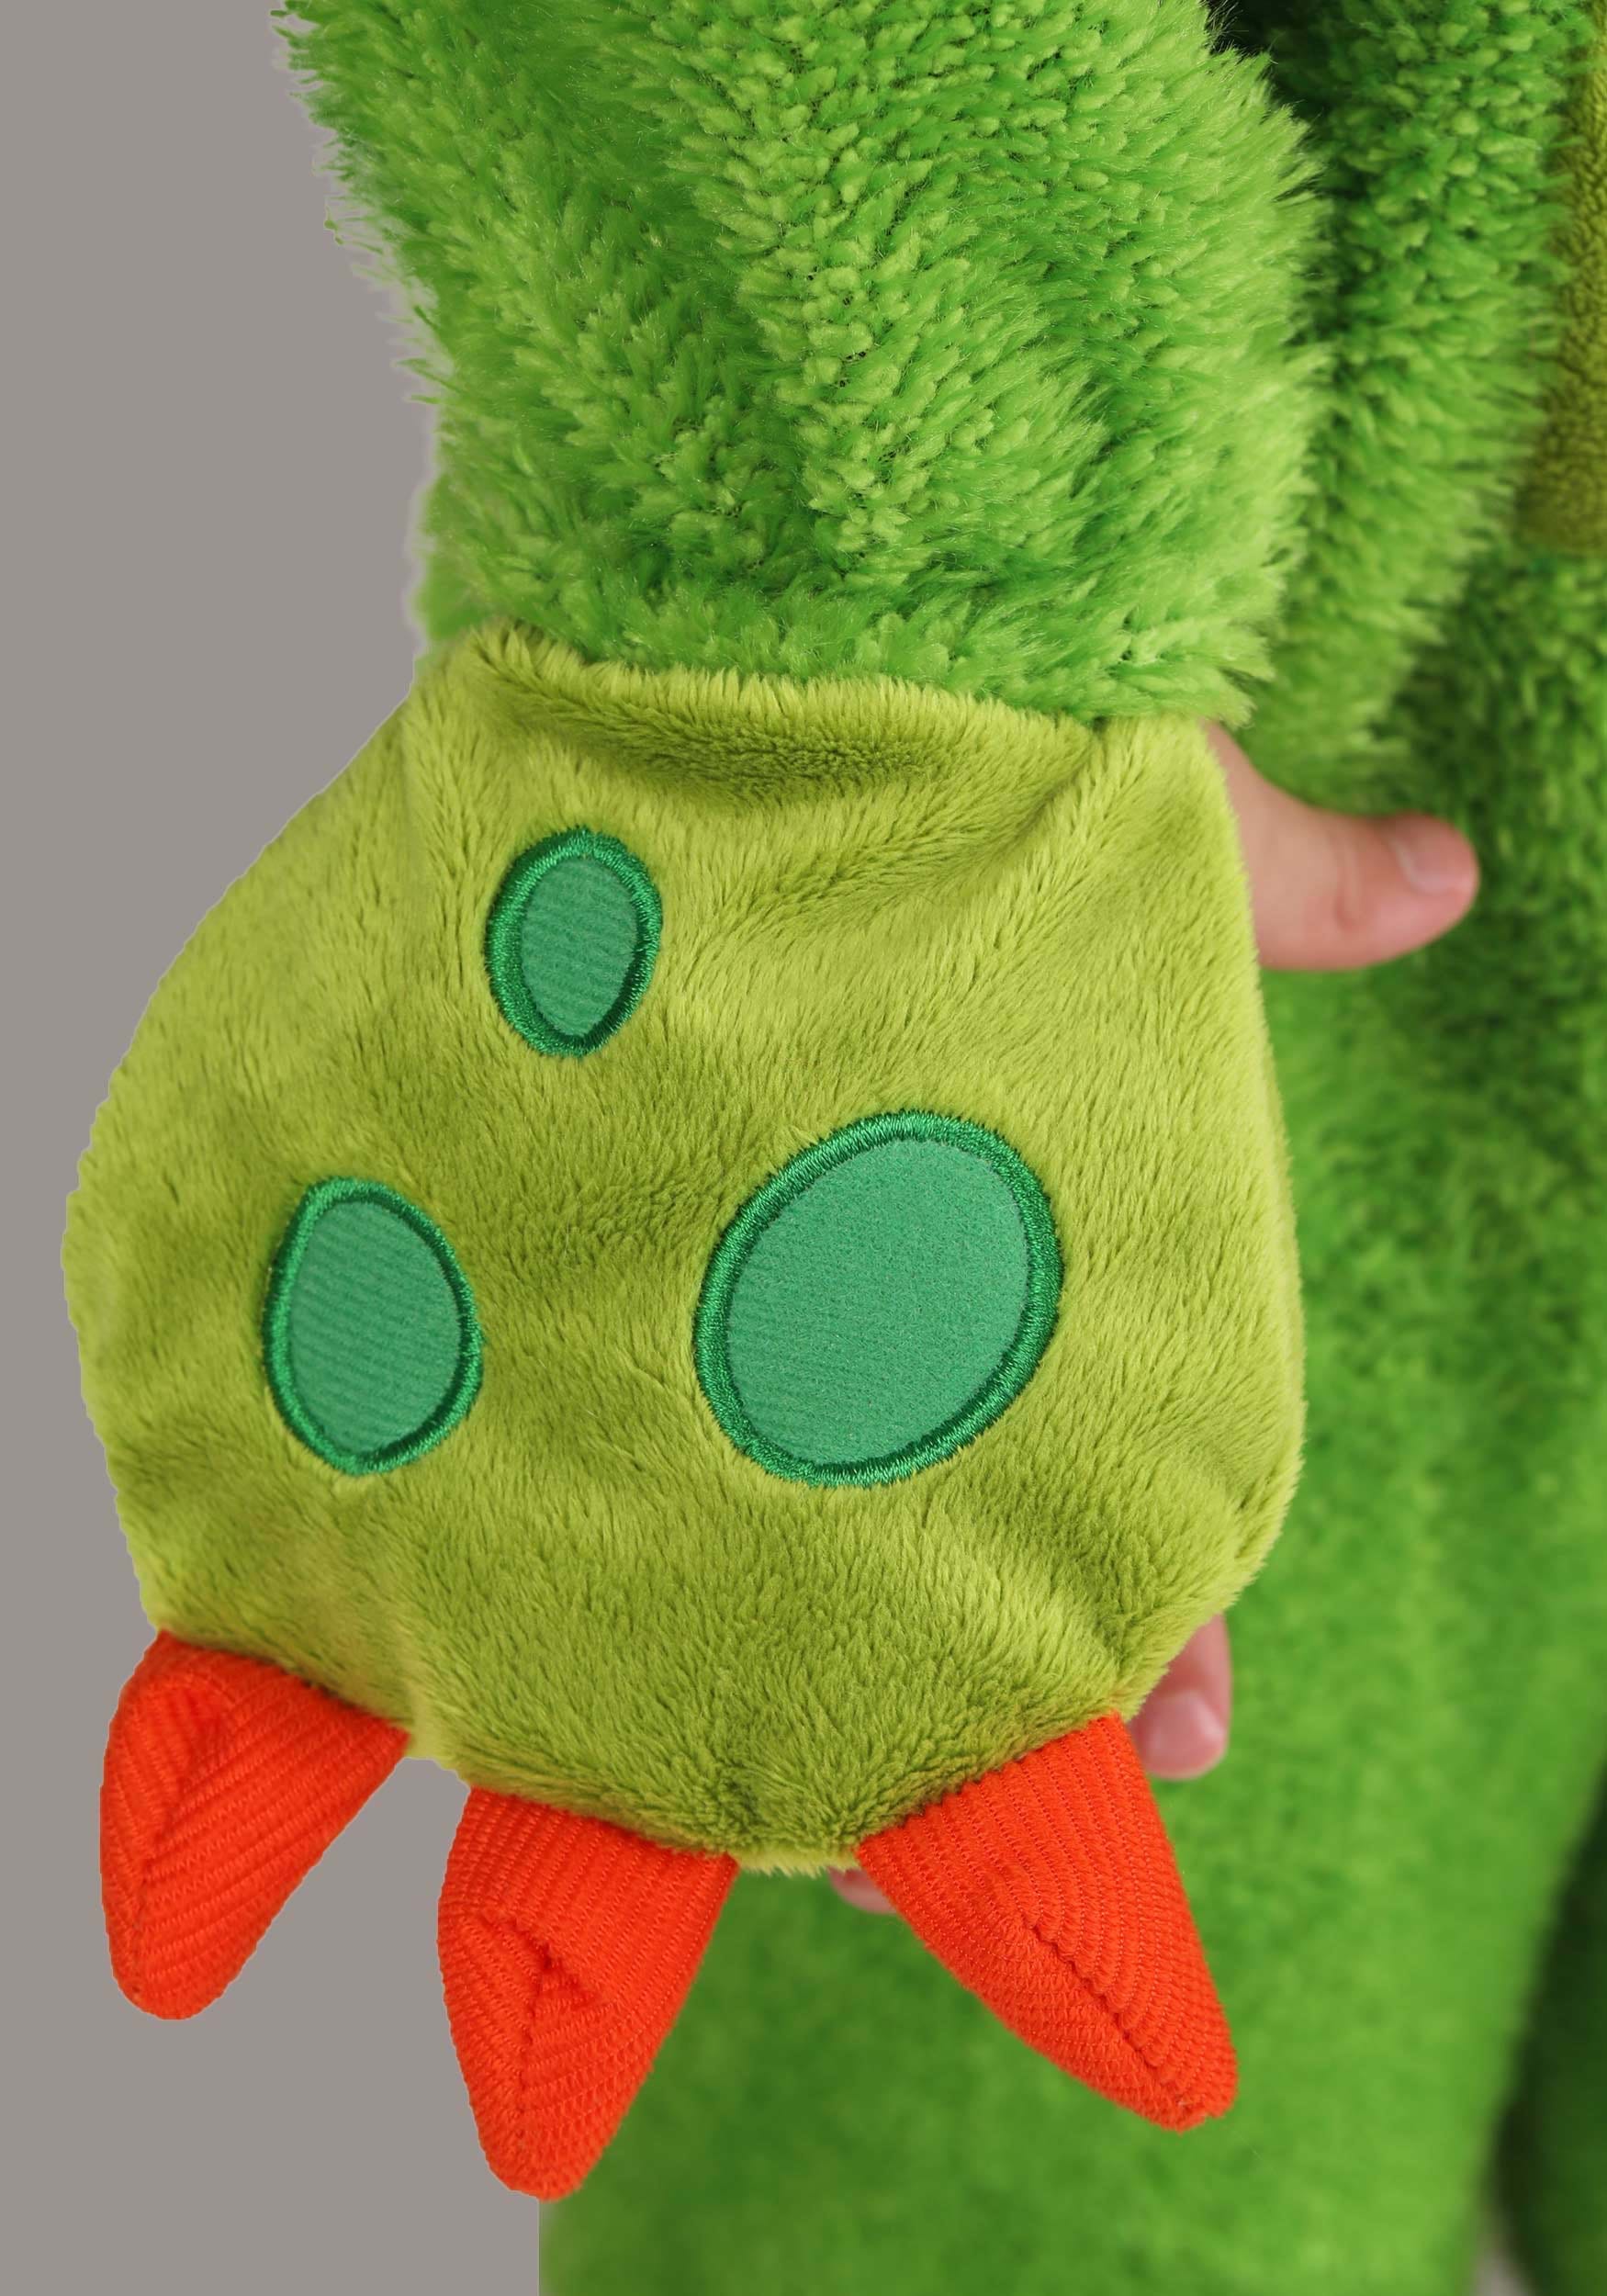 Spotted Green Monster Toddler Costume